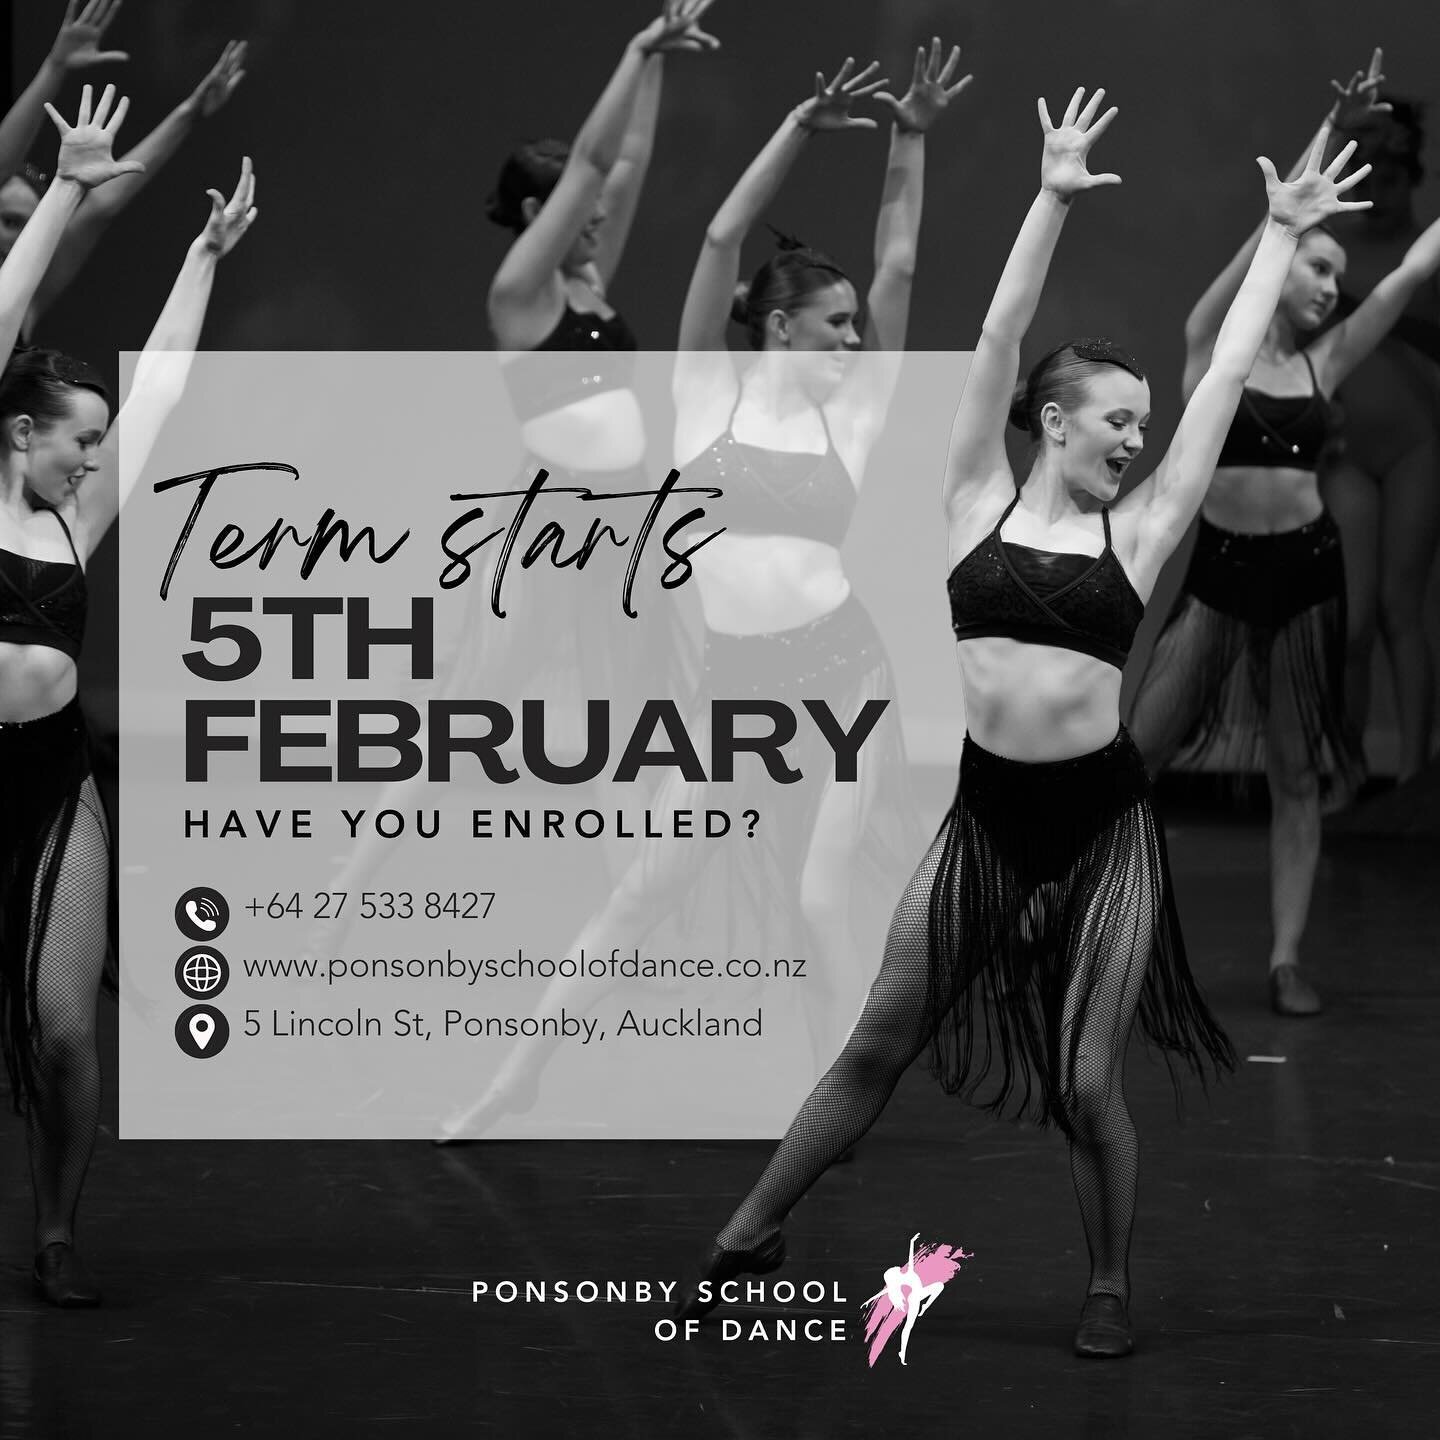 ‼️ WHO&rsquo;S READY FOR TERM 1 ‼️

Get those dance shoes warmed up because the dance year kicks off on February 5th! Term 1 classes are filling up fast, so jump online and enrol now if you haven&rsquo;t already! 

Not sure how to enrol?
💻 - Head to